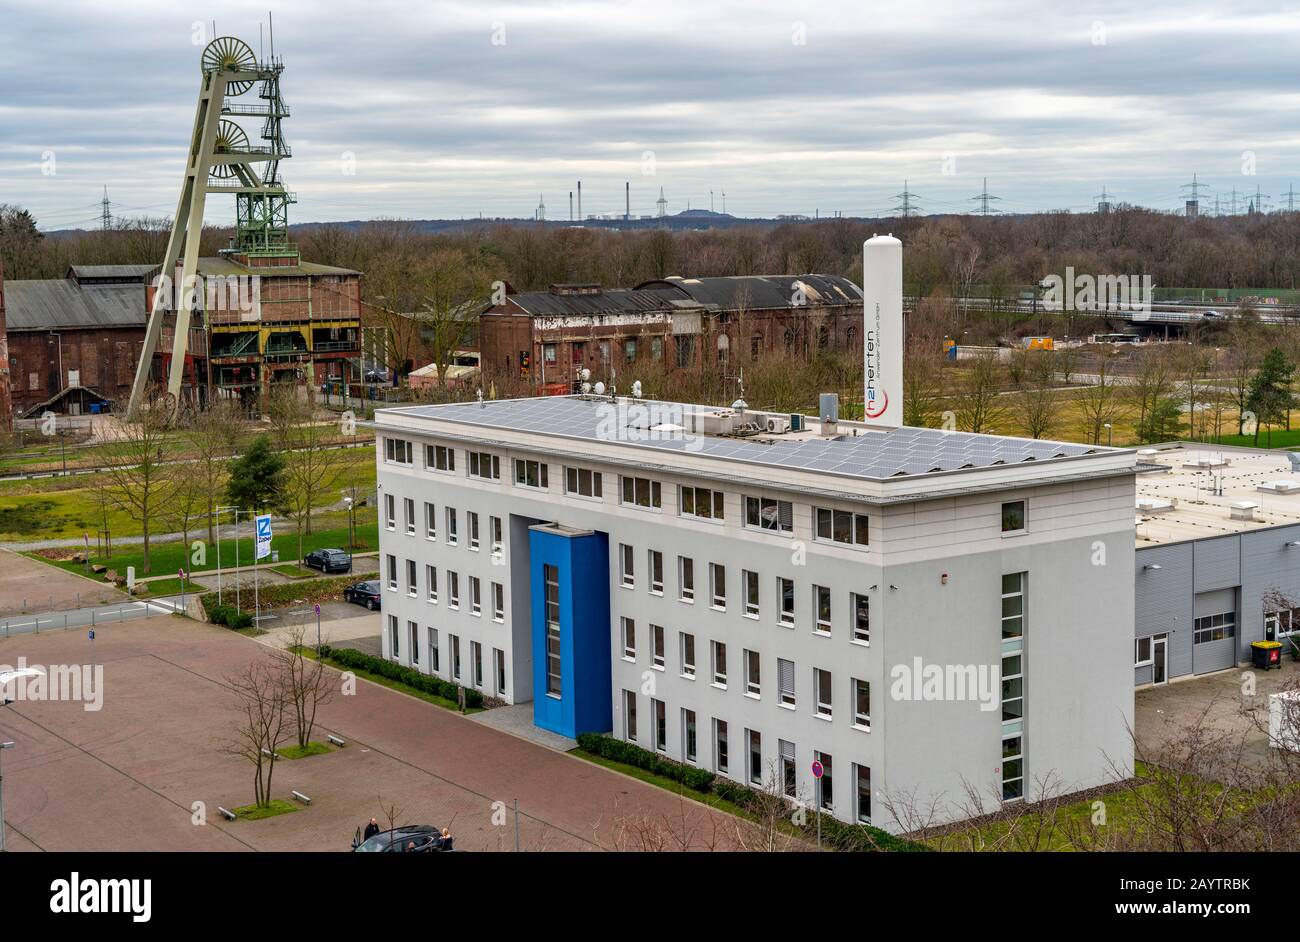 Shaft 2 of the disused Ewald colliery in Herten, building of the Technology Centre, H2Herten, Hydrogen Competence Centre, settlement of new businesses Stock Photo